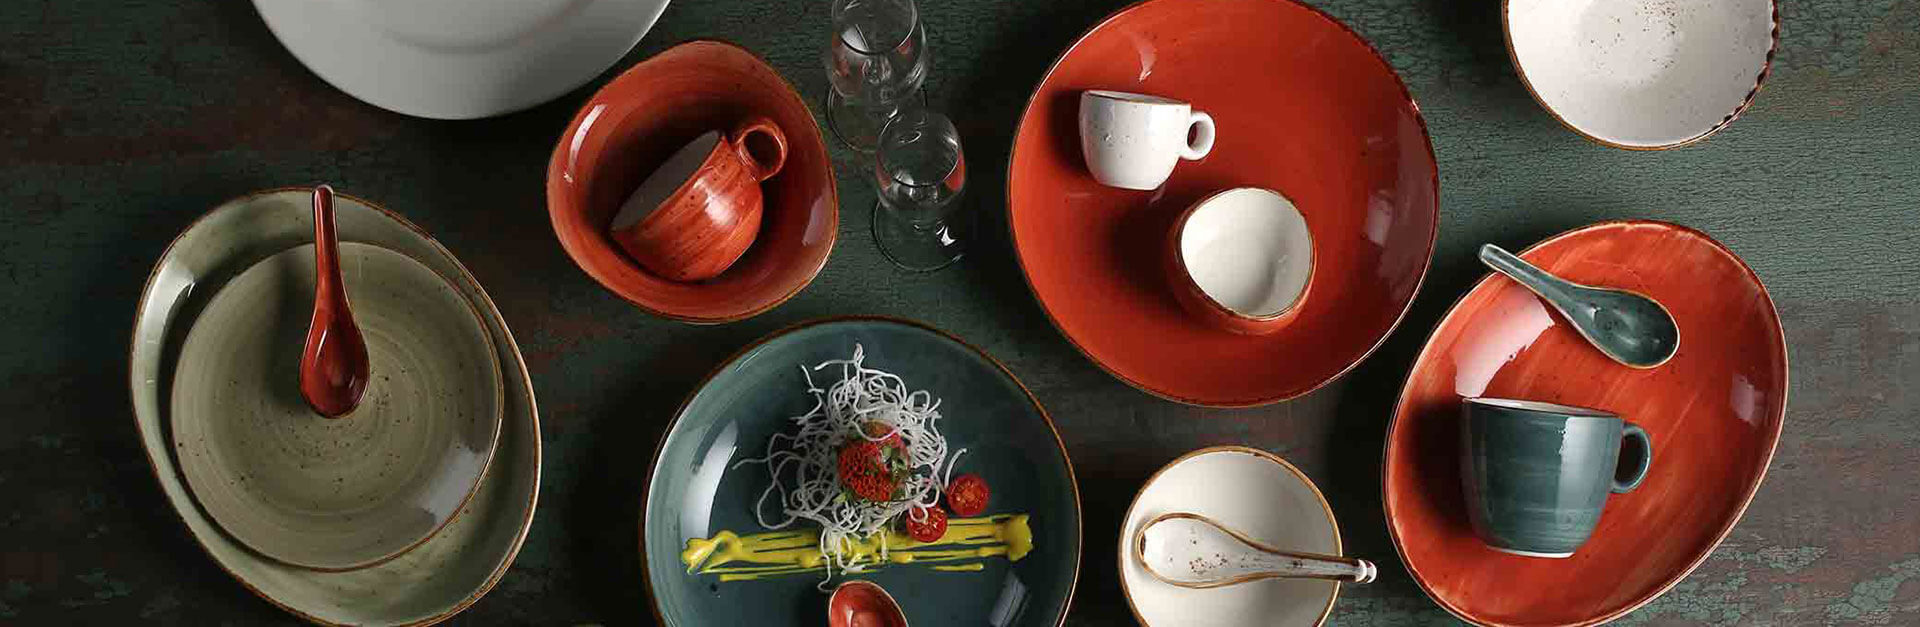 Crockery Products You Can Get in ORCHIDOtherAnnouncementsCentral DelhiKarol Bagh